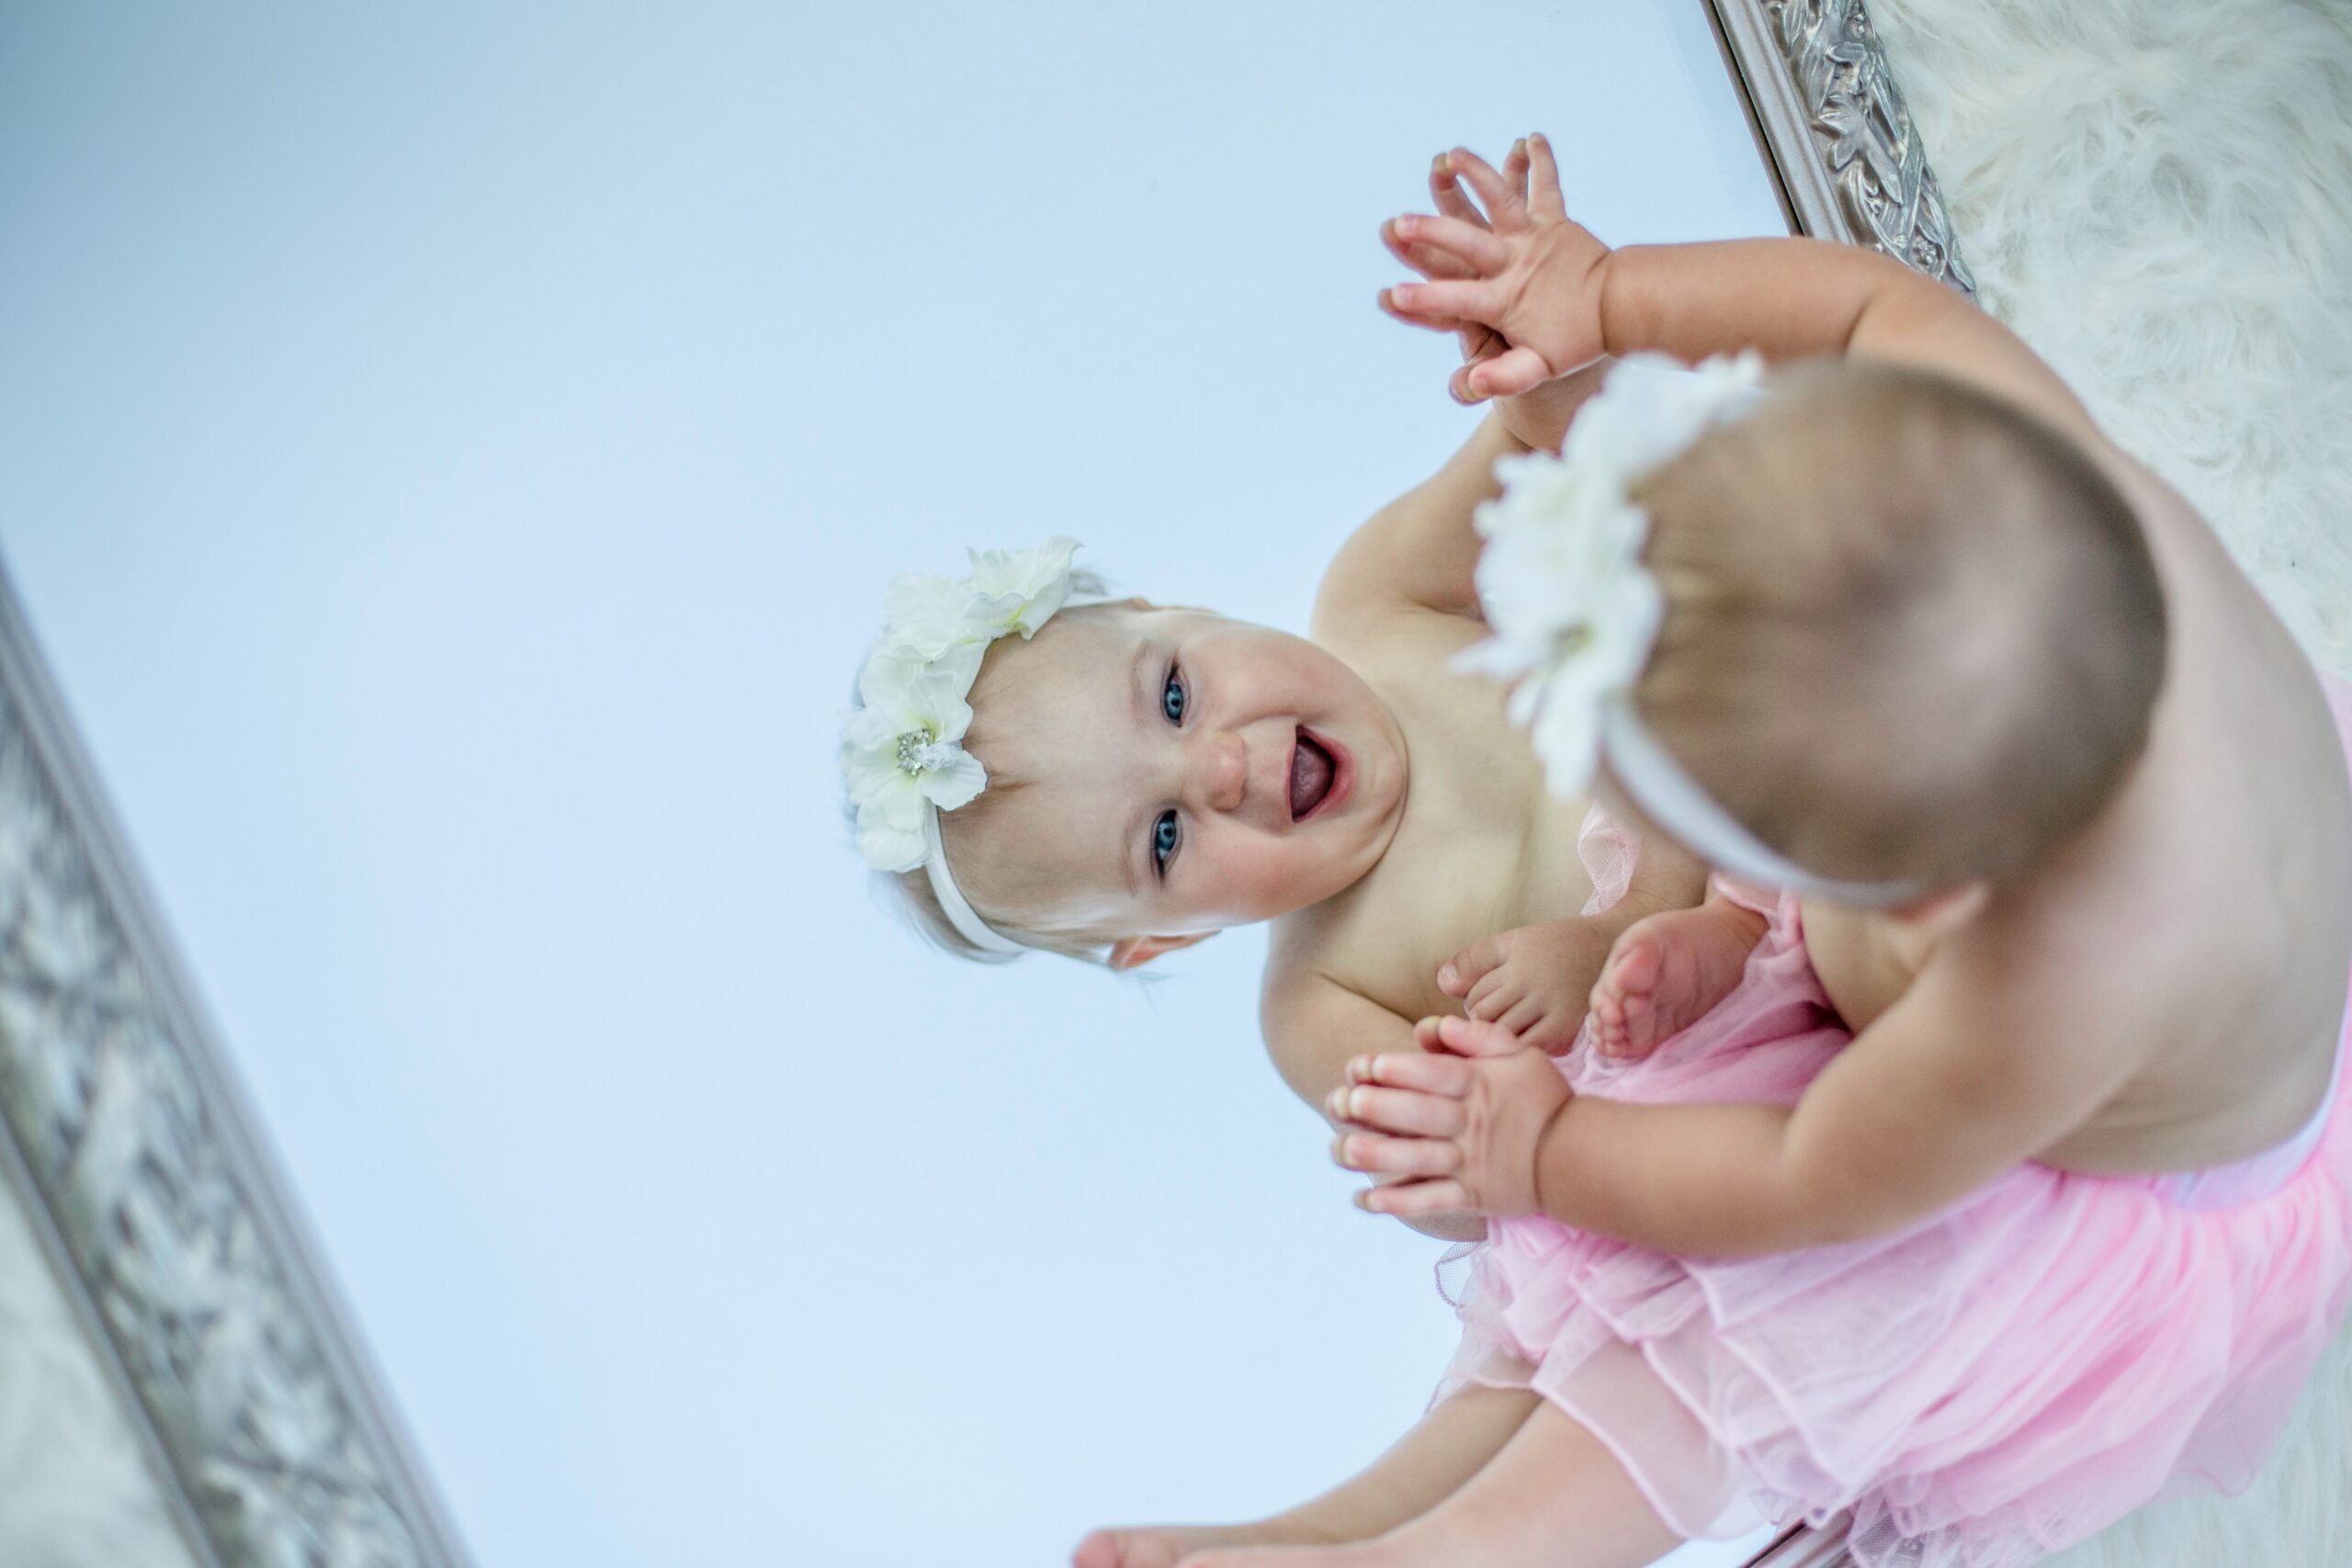 Toddler looking in the mirror with an expression of joy